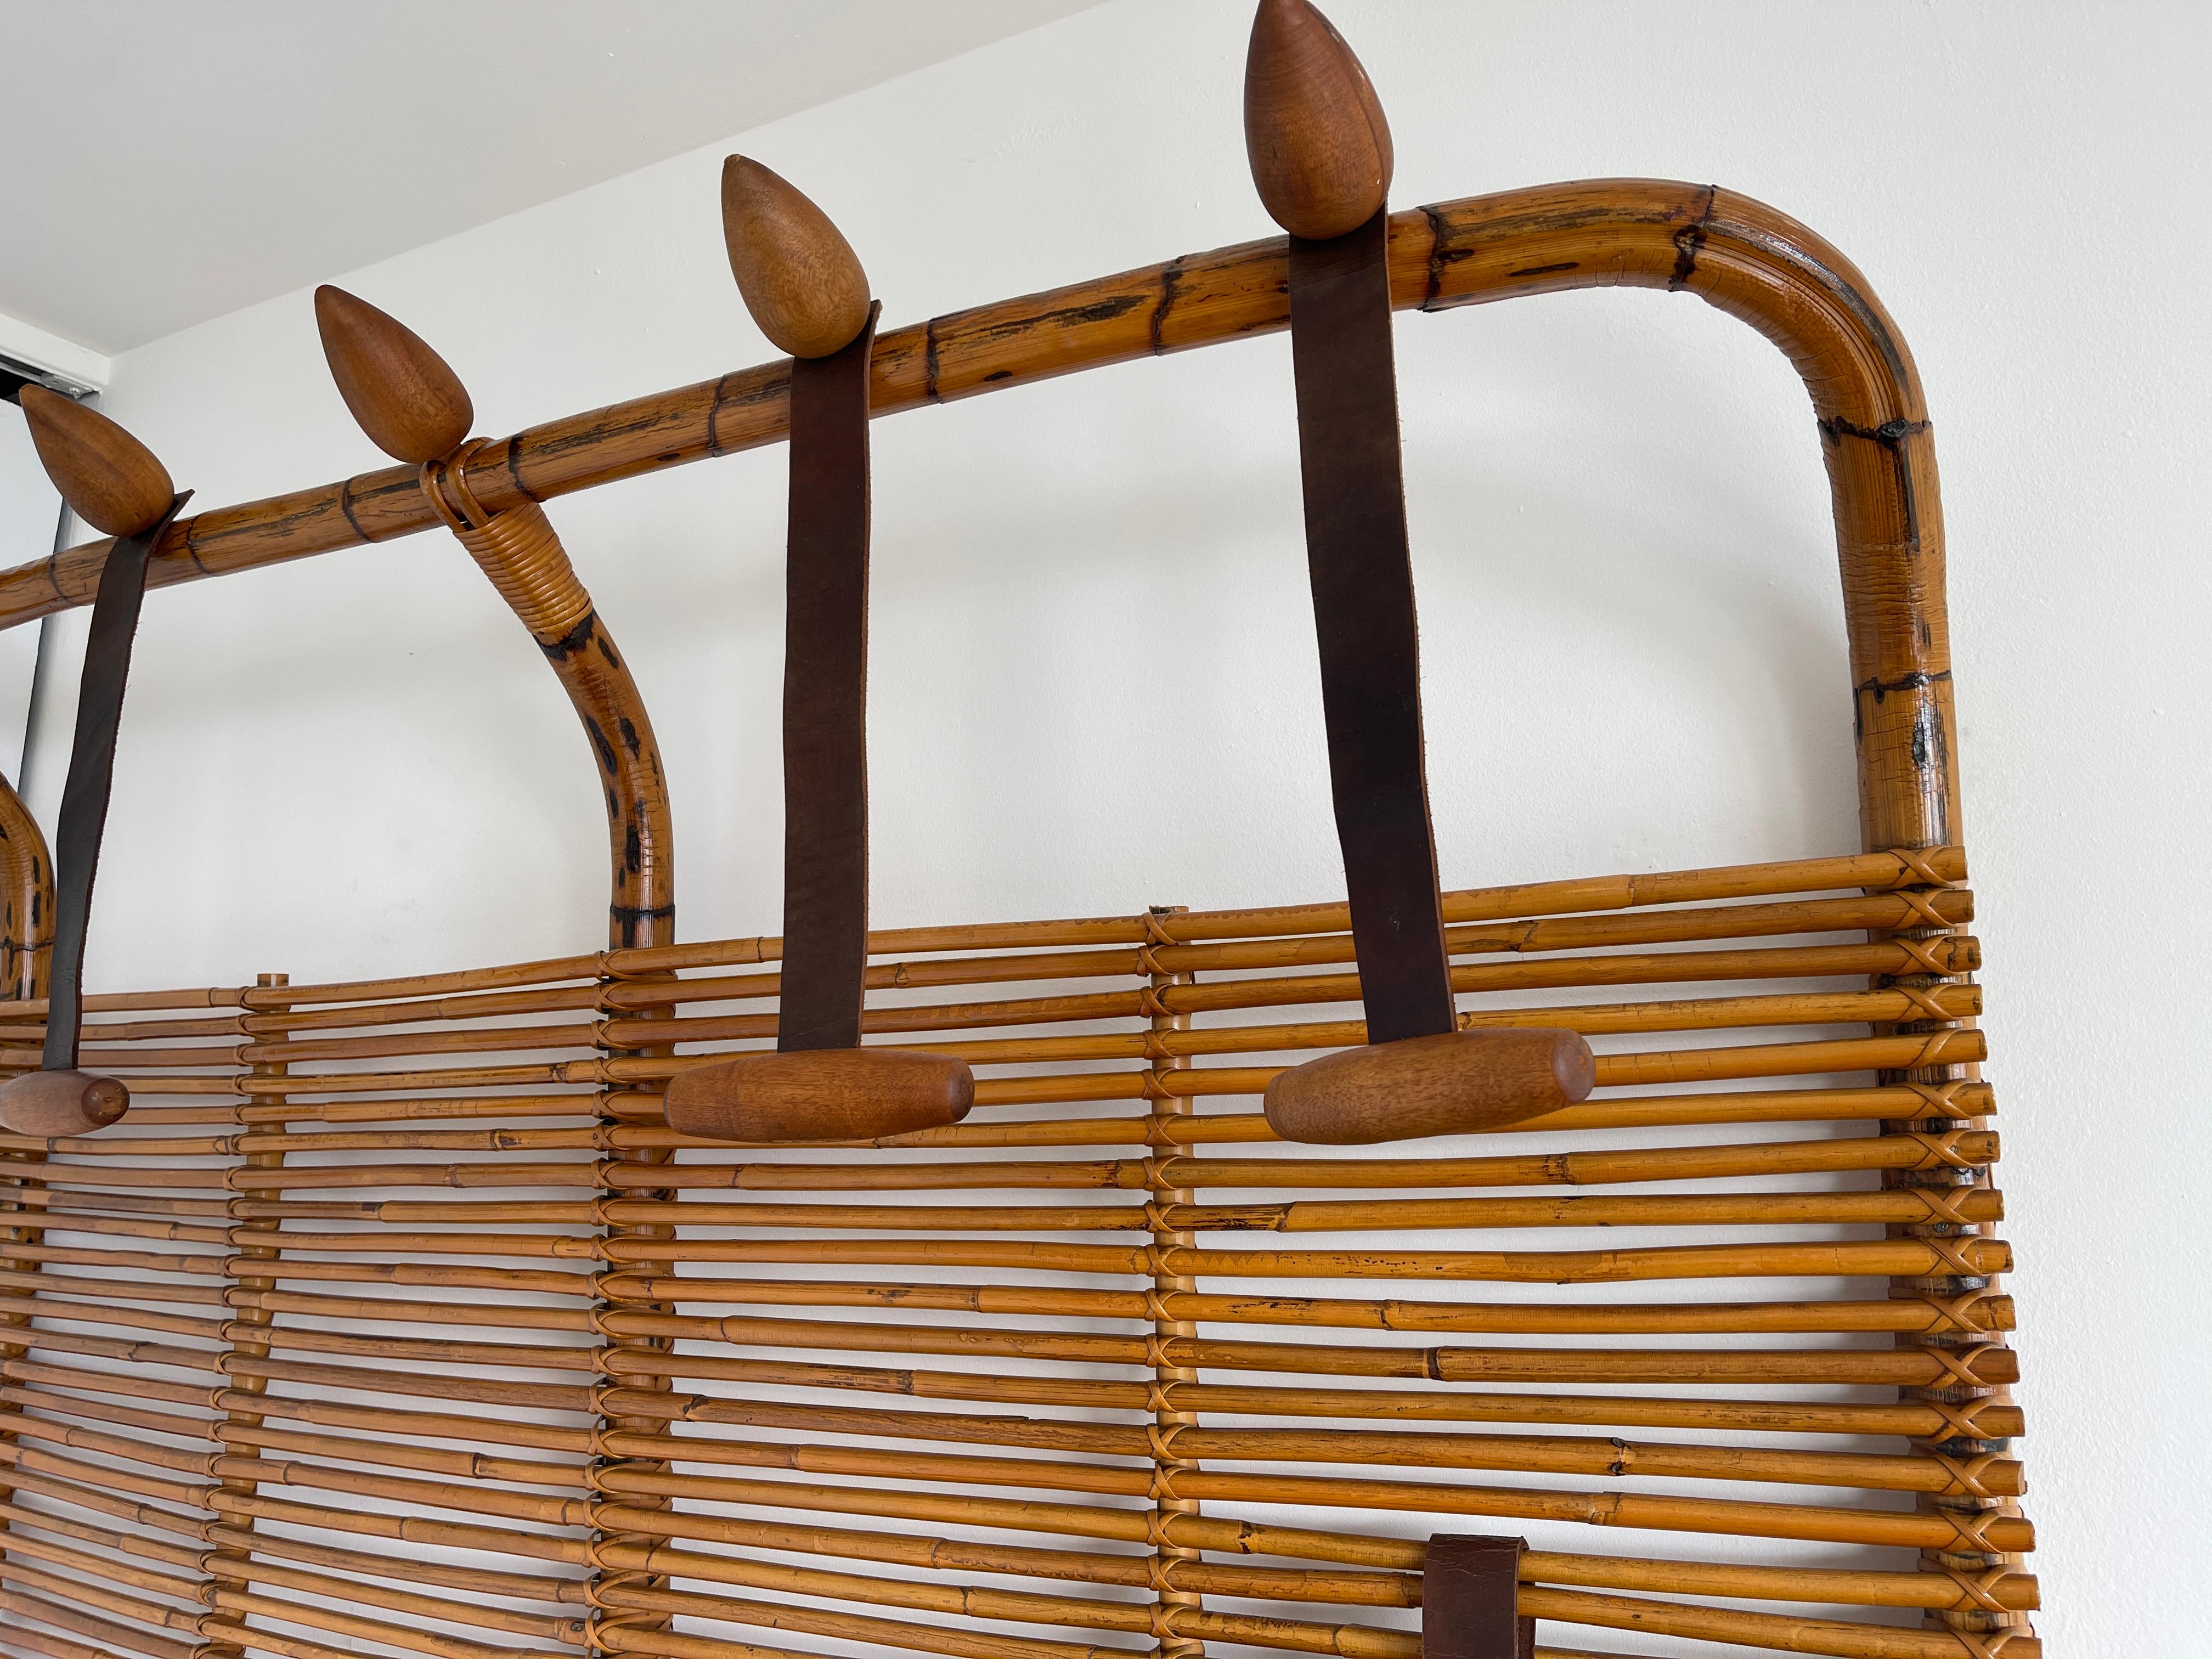 Extremely large scale wall hanging coat rack by Tito Agnoli for Pierantonio Bonacina with floating wood hooks hanging from black leather - a built in floating umbrella holder.
Incredible piece!